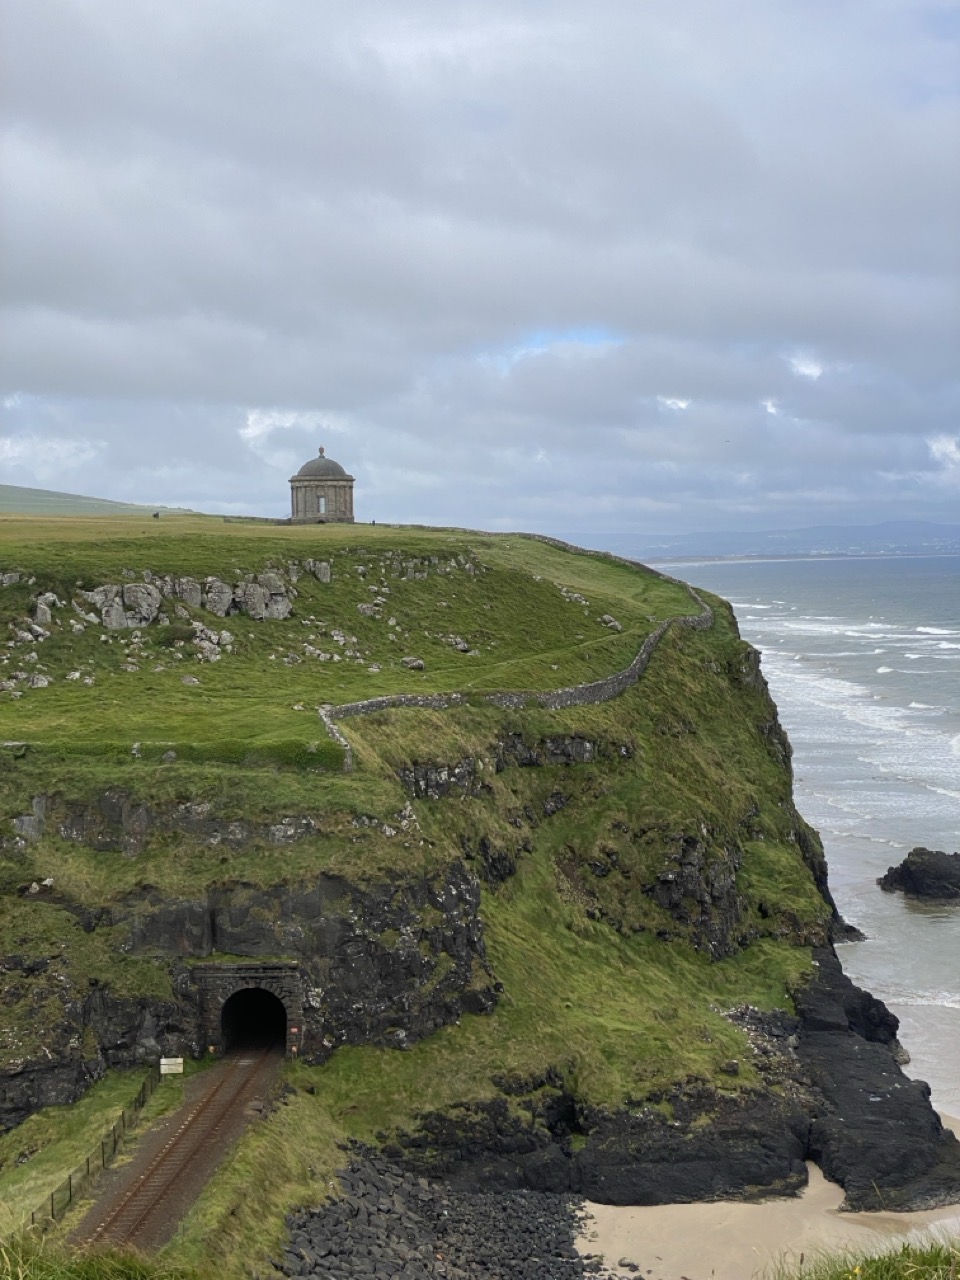 Mussenden Temple with the railway tunnel beneath it